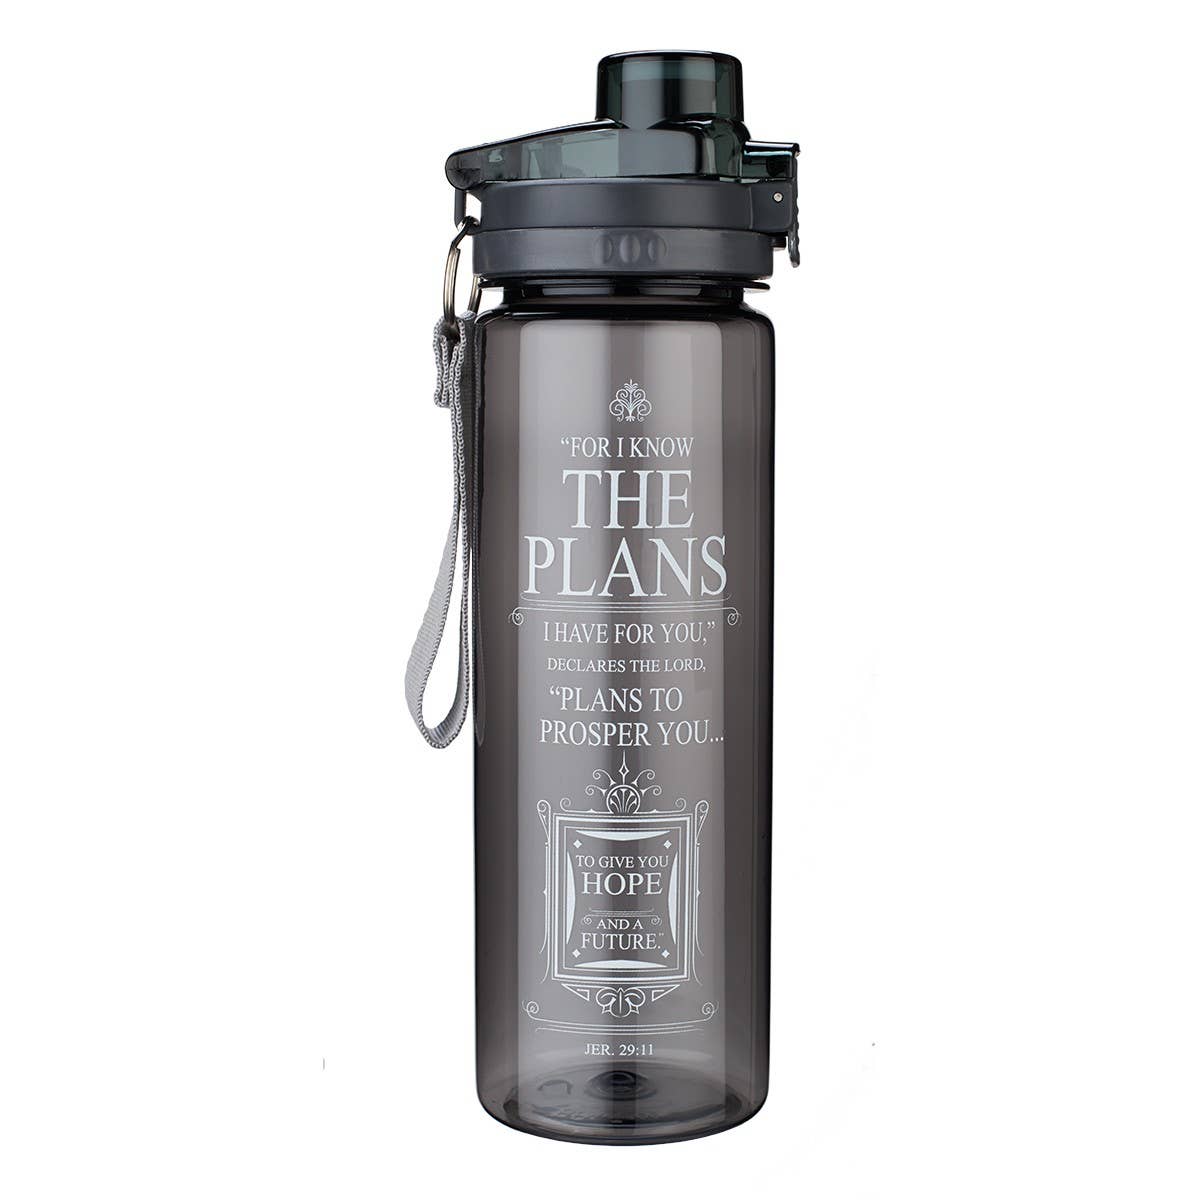 I Know the Plans Black Plastic Water Bottle